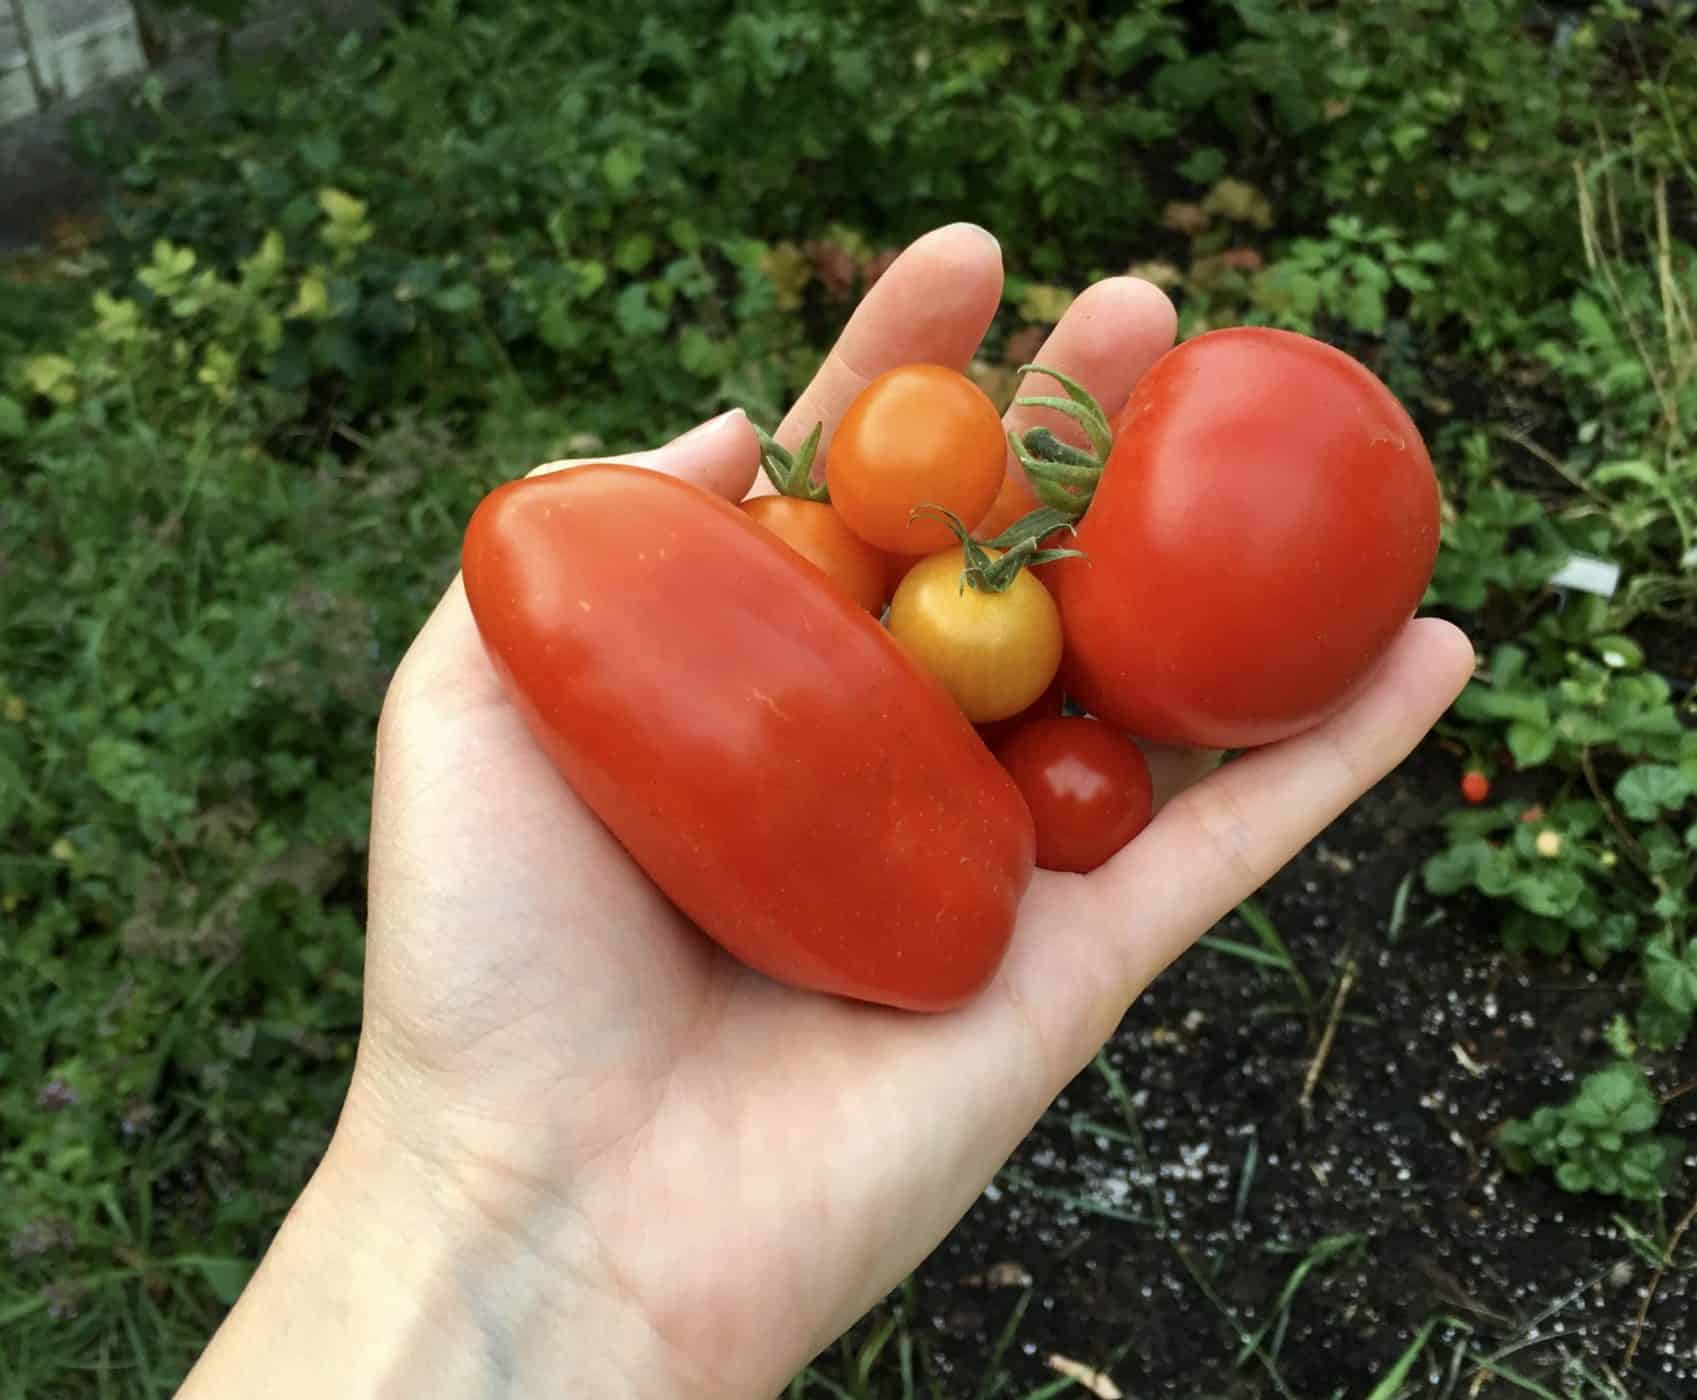 Plum tomato beside other types of tomatoes